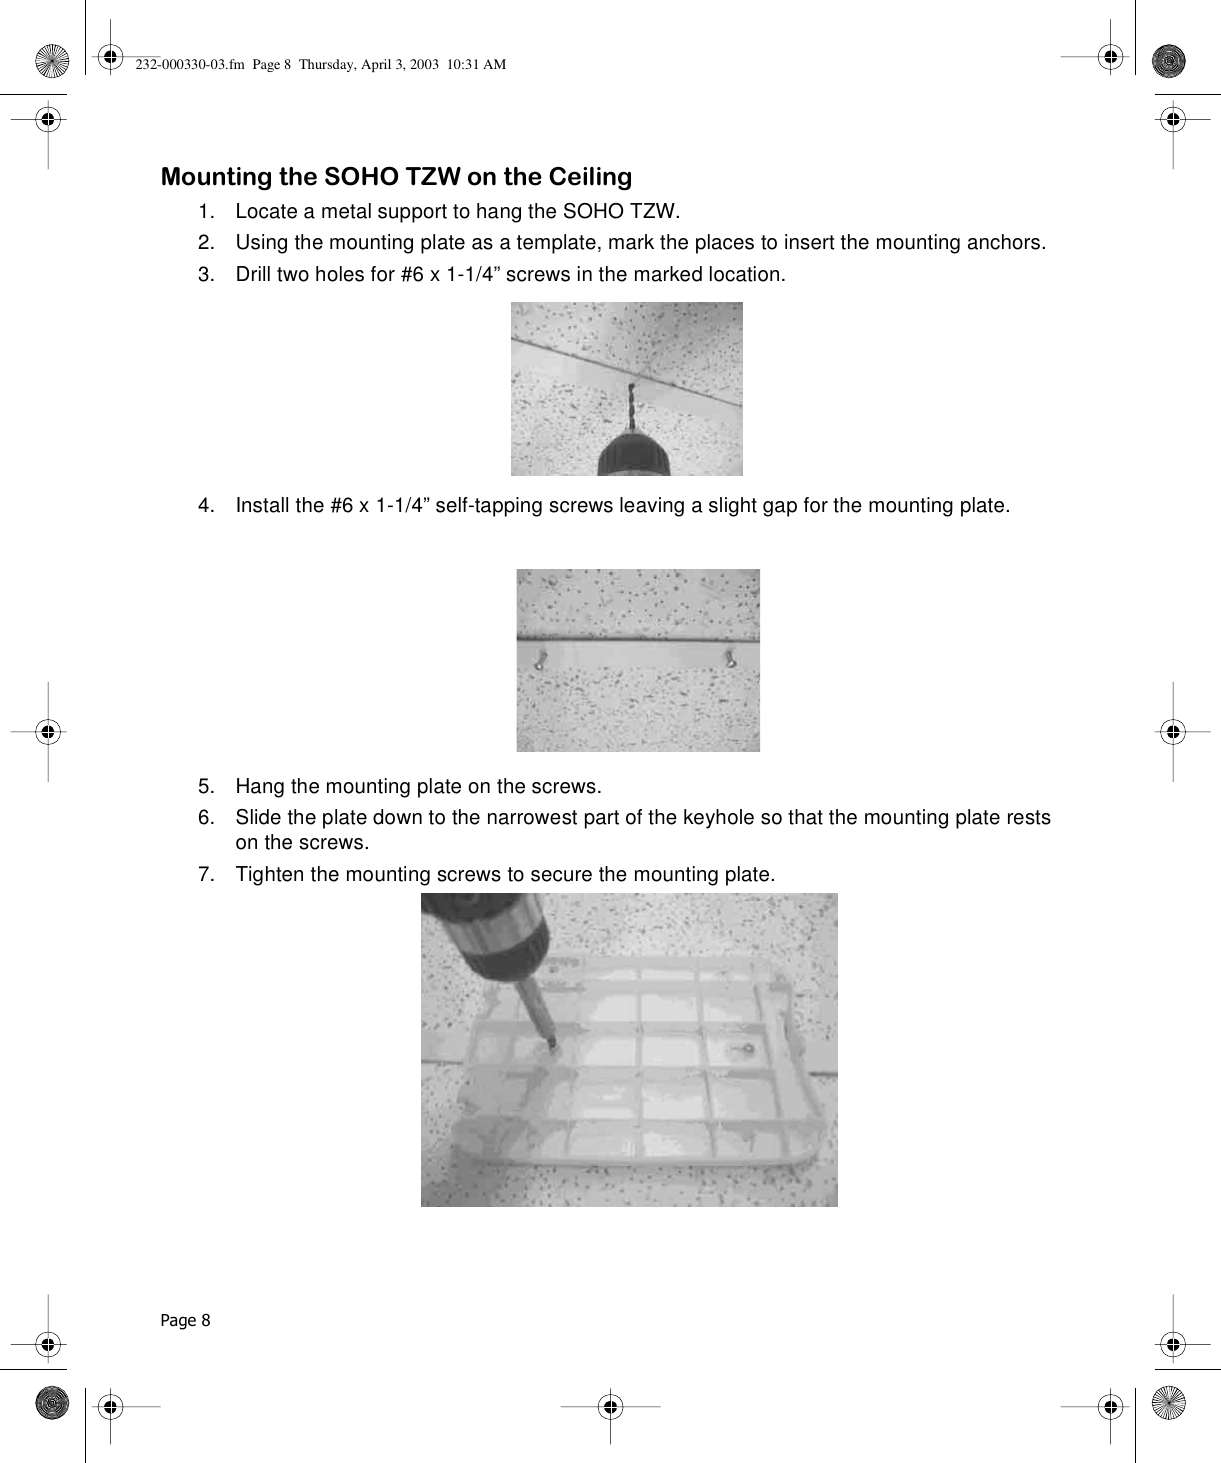 Page 8 Mounting the SOHO TZW on the Ceiling1. Locate a metal support to hang the SOHO TZW.2. Using the mounting plate as a template, mark the places to insert the mounting anchors.3. Drill two holes for #6 x 1-1/4” screws in the marked location.4. Install the #6 x 1-1/4” self-tapping screws leaving a slight gap for the mounting plate. 5. Hang the mounting plate on the screws.6. Slide the plate down to the narrowest part of the keyhole so that the mounting plate rests on the screws.7. Tighten the mounting screws to secure the mounting plate.232-000330-03.fm  Page 8  Thursday, April 3, 2003  10:31 AM